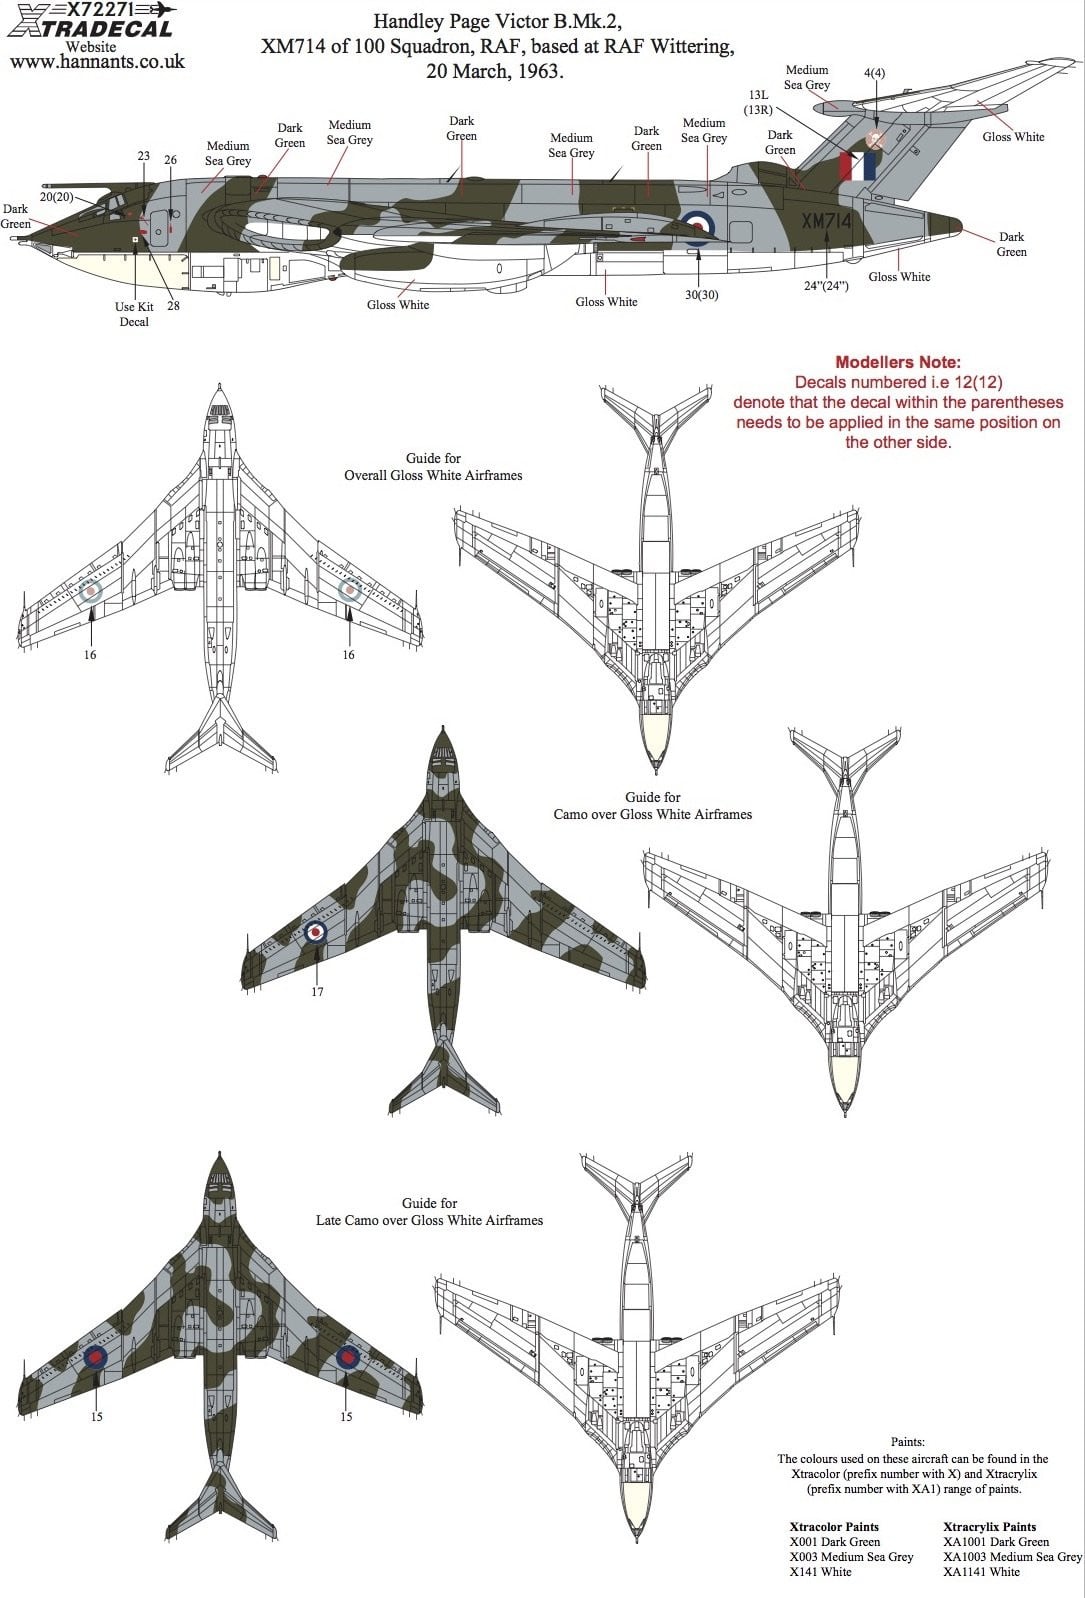 Xtradecal X72271 1/72 Handley-Page Victor B.2 Collection Model Decals - SGS Model Store